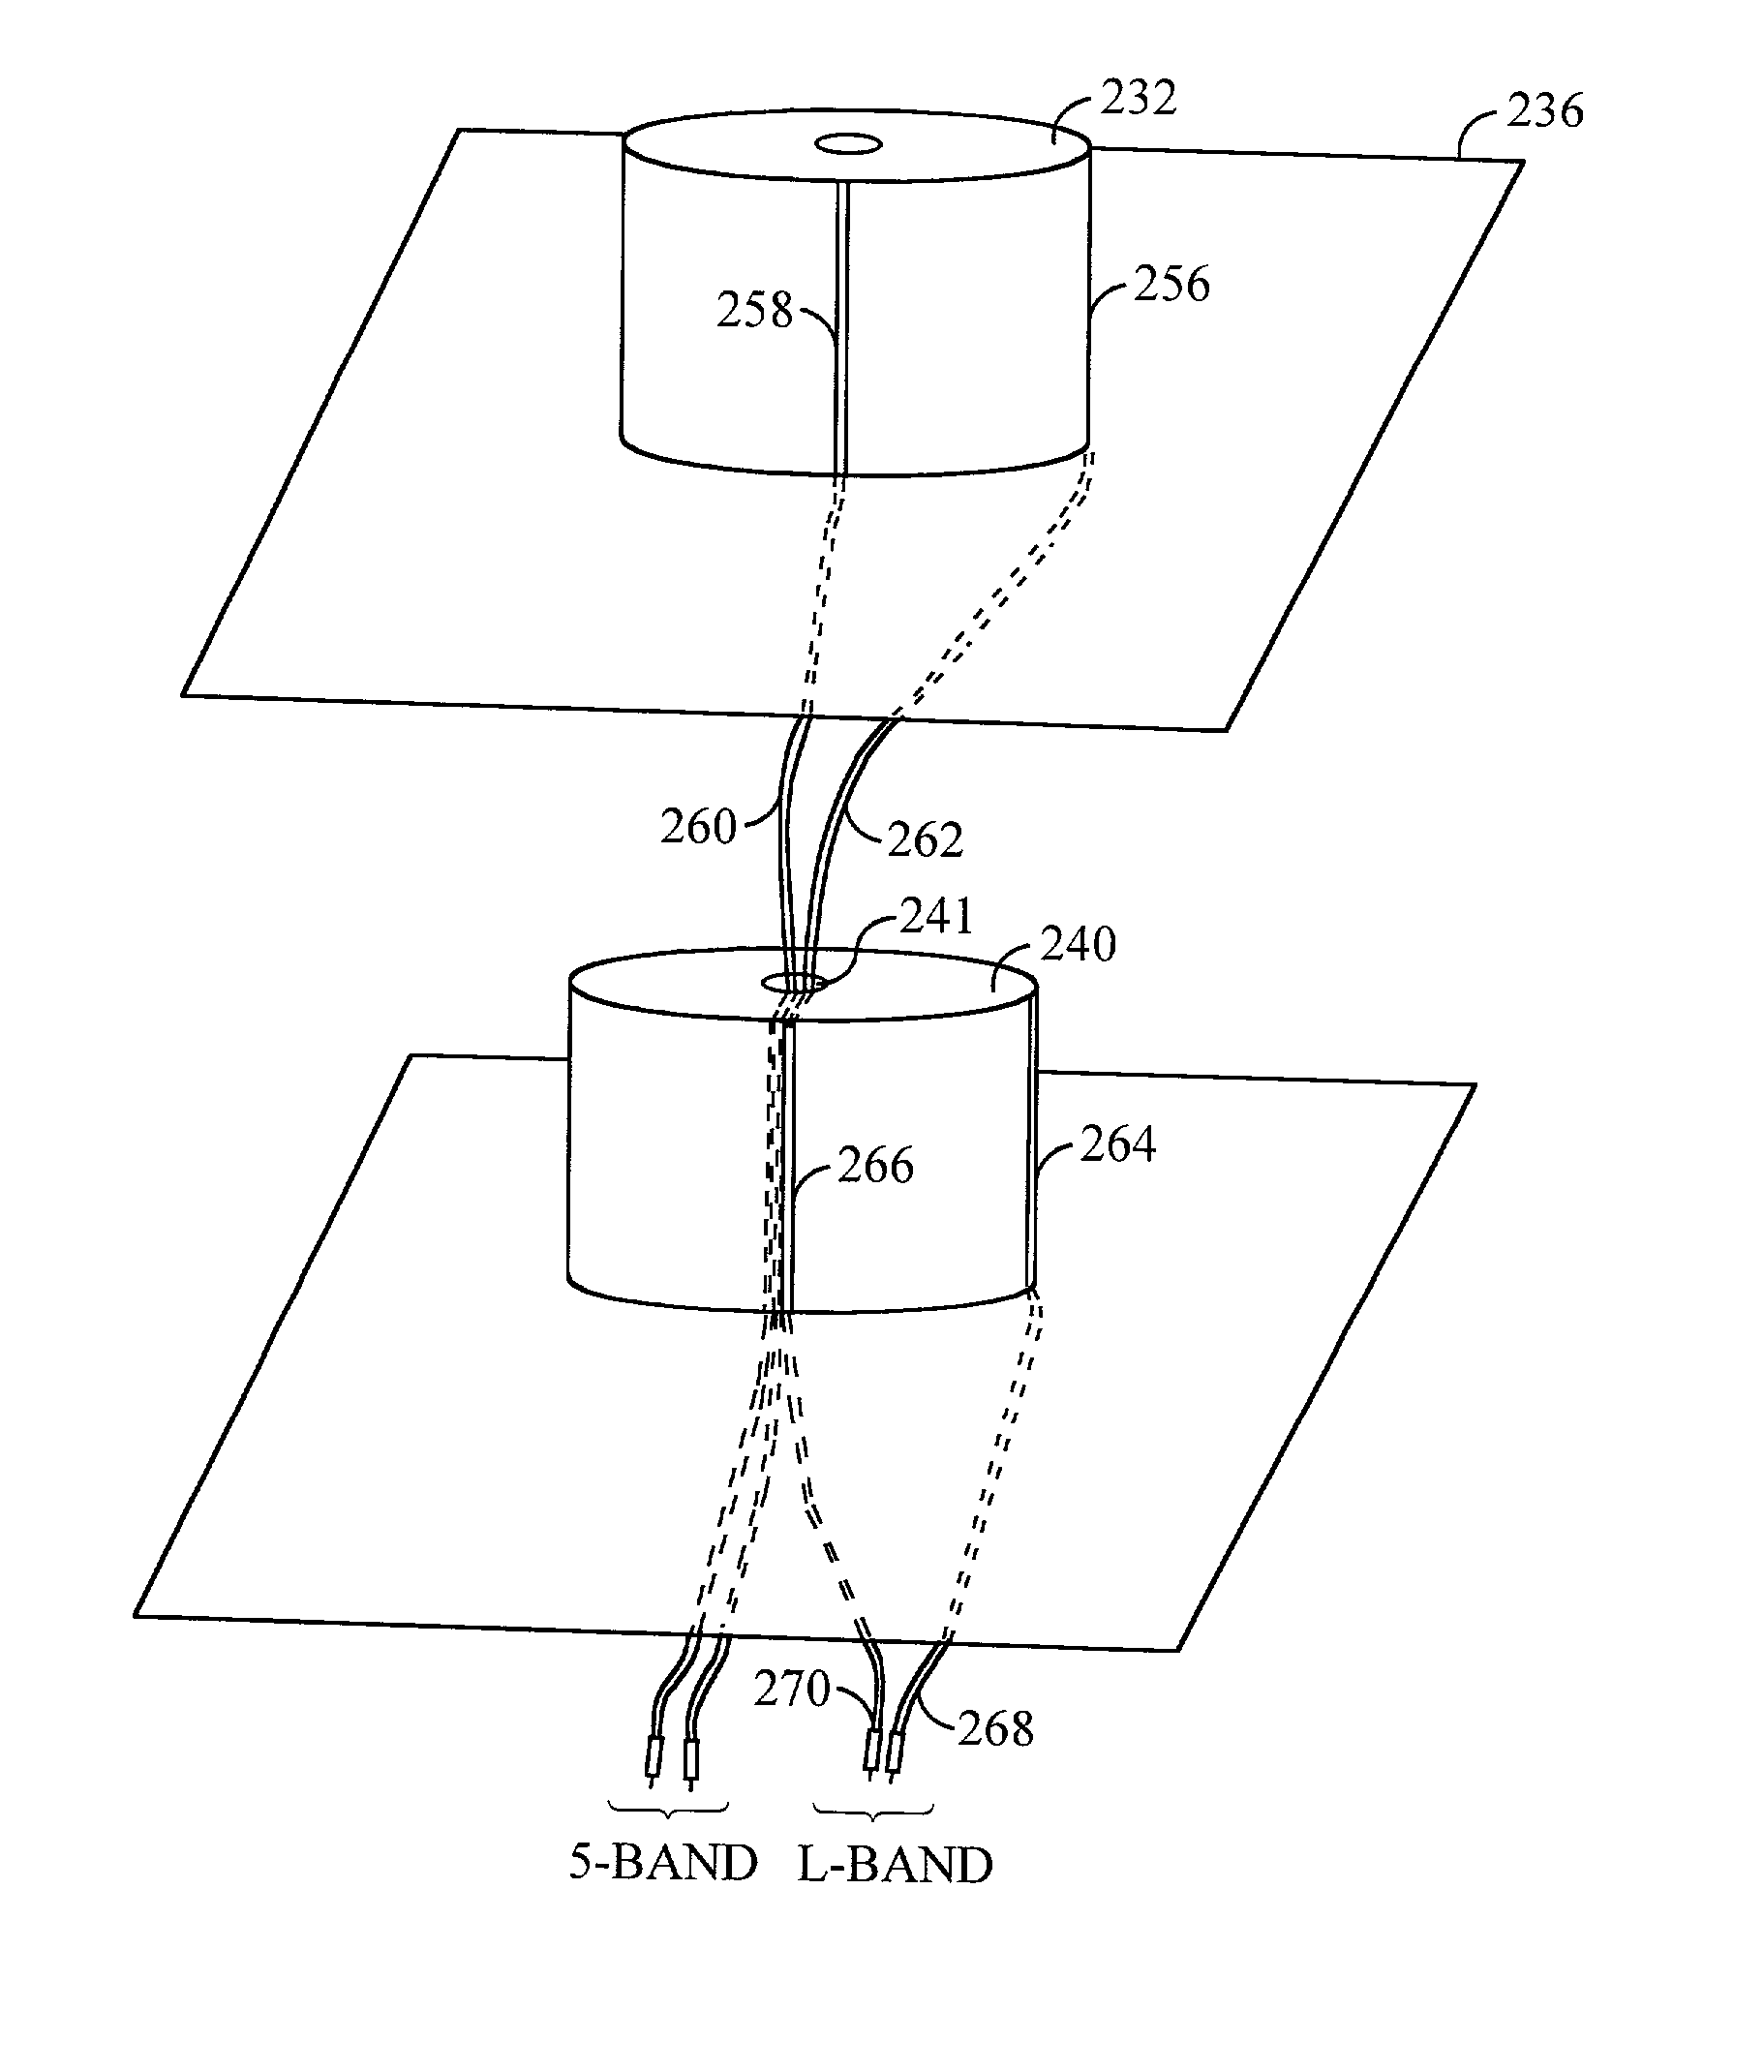 Dielectric-patch resonator antenna